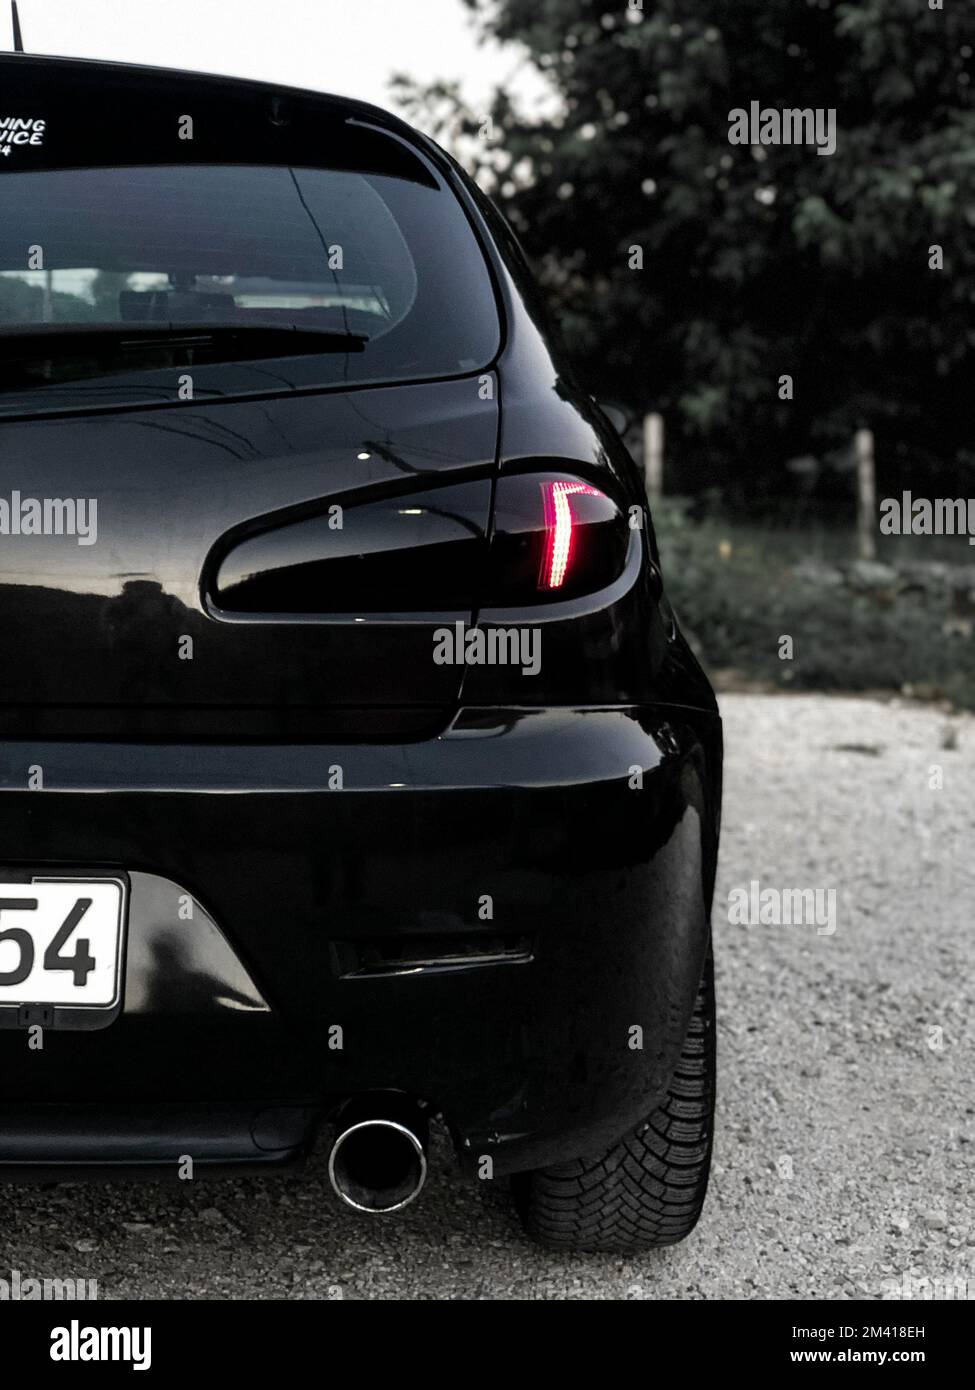 A rear view of a black Alfa Romeo 147 sports car parked outdoors